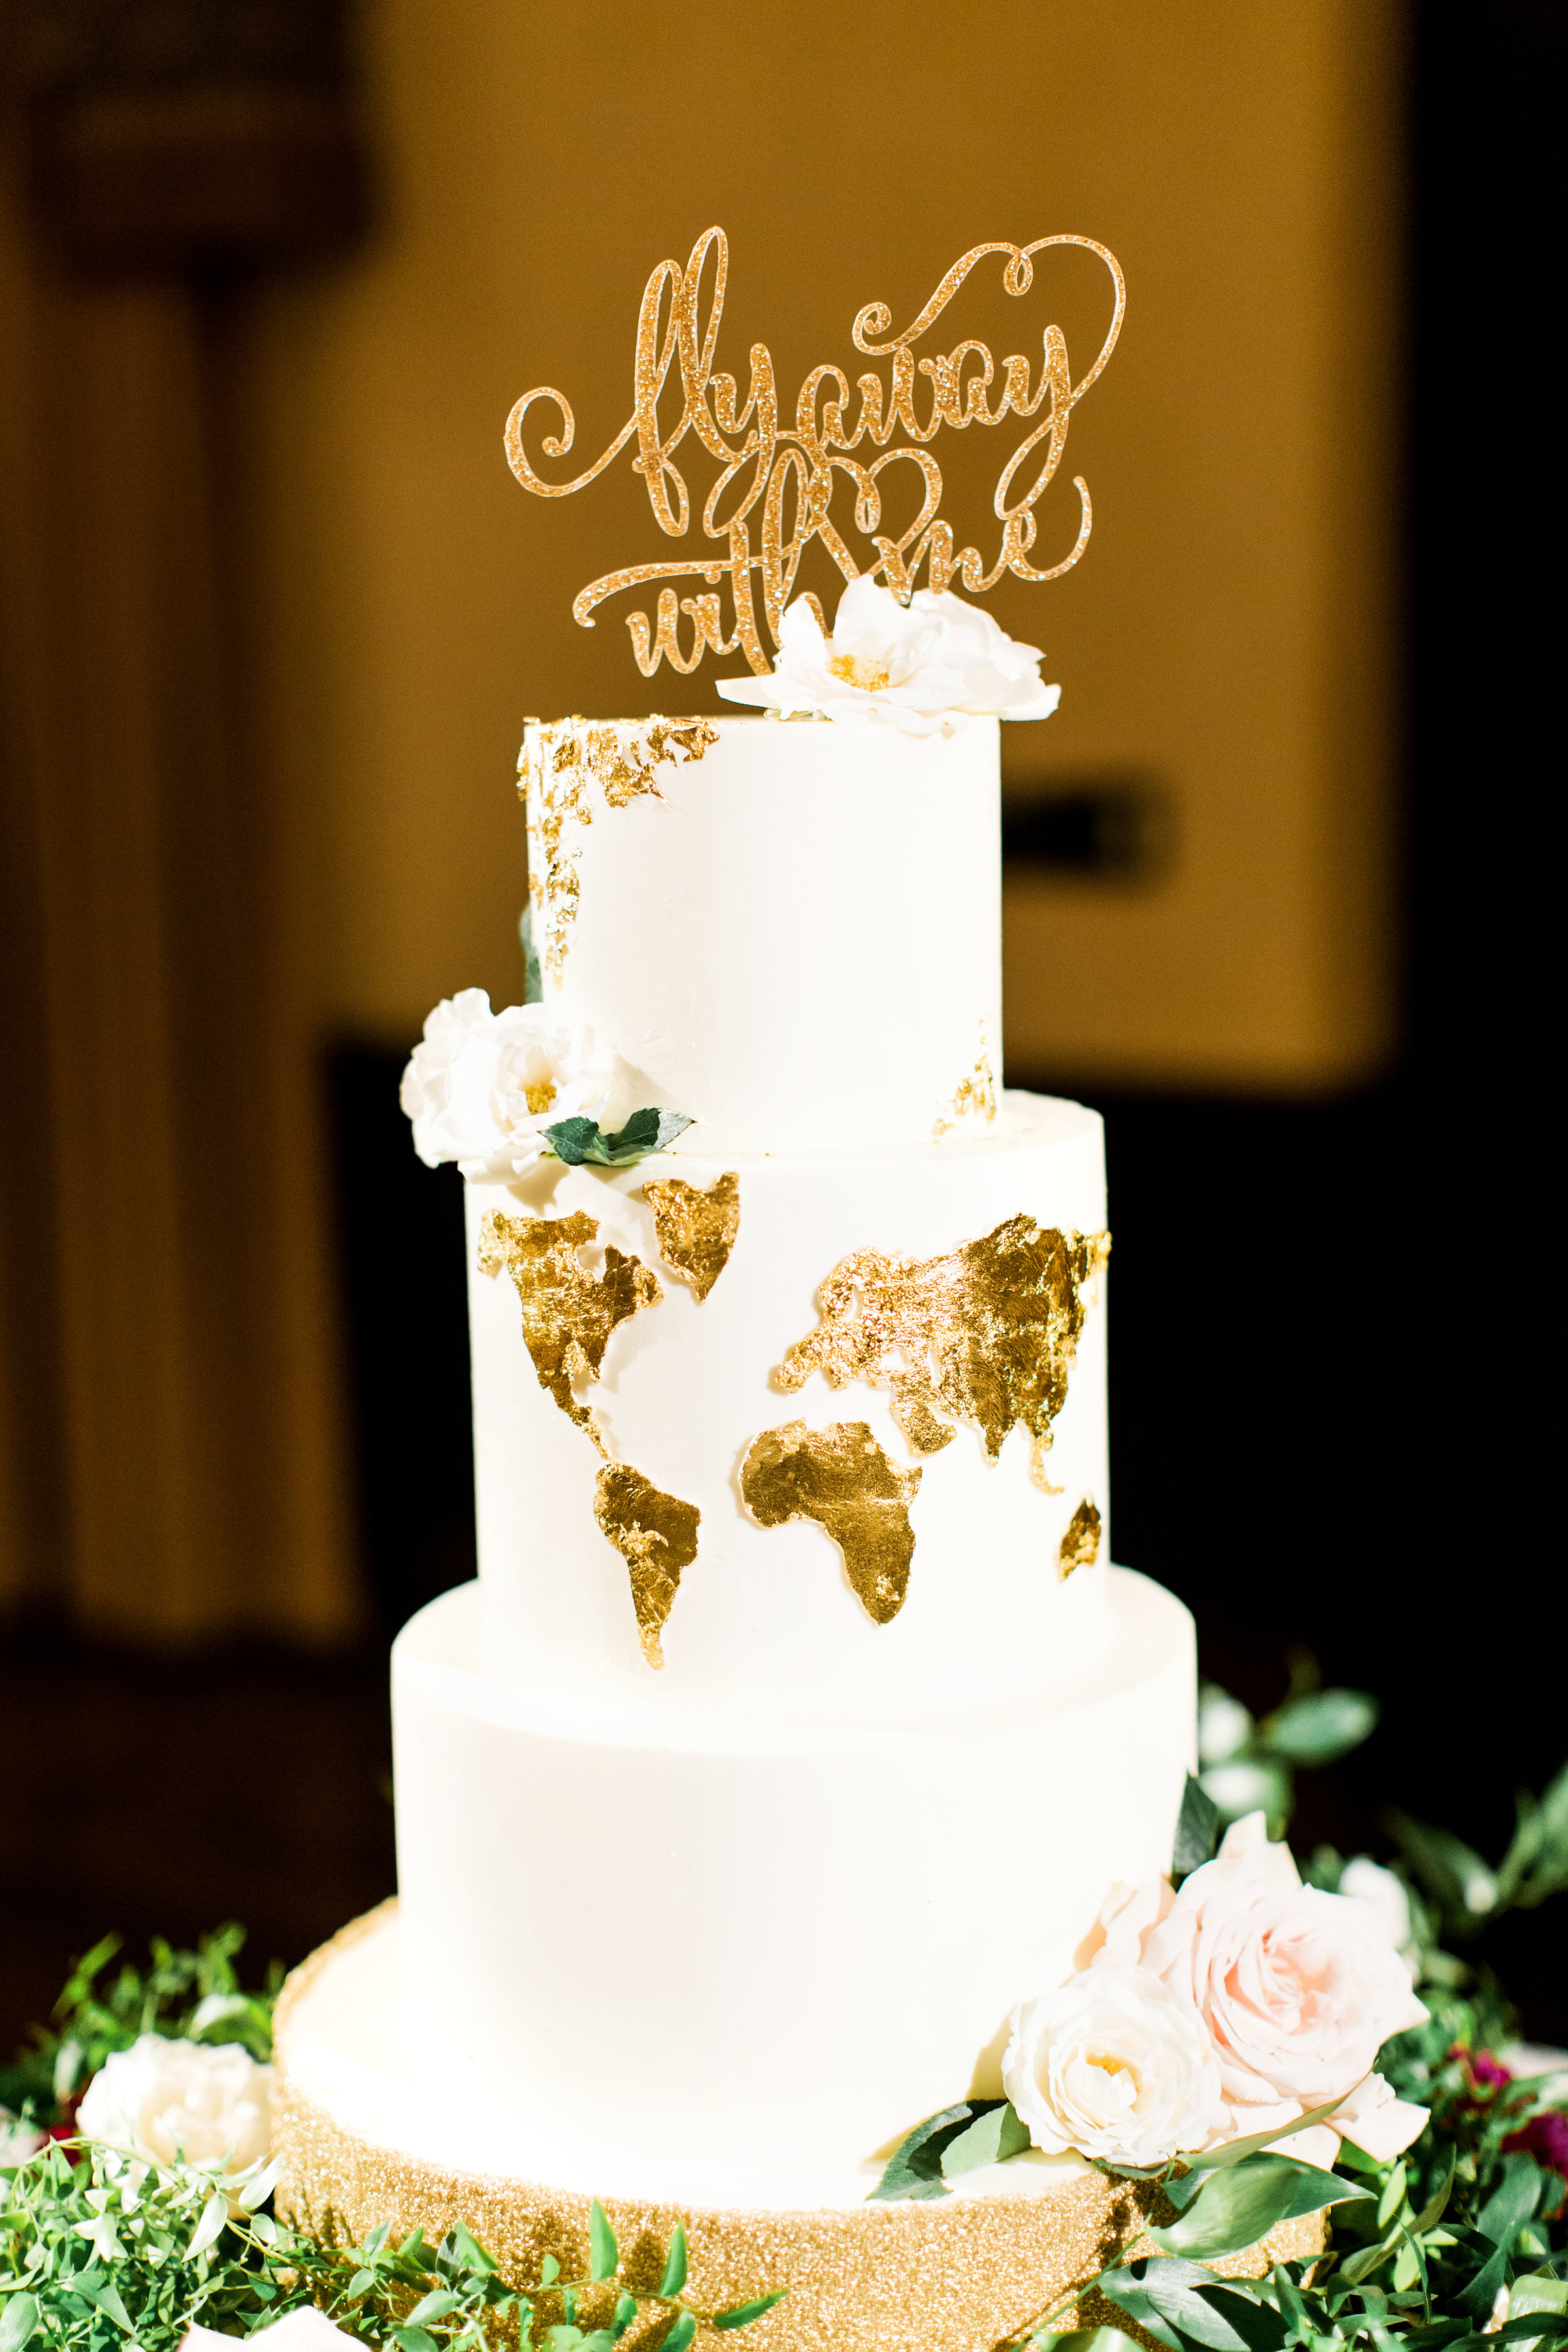 Wedding Cake, Come fly away with me, travel, map